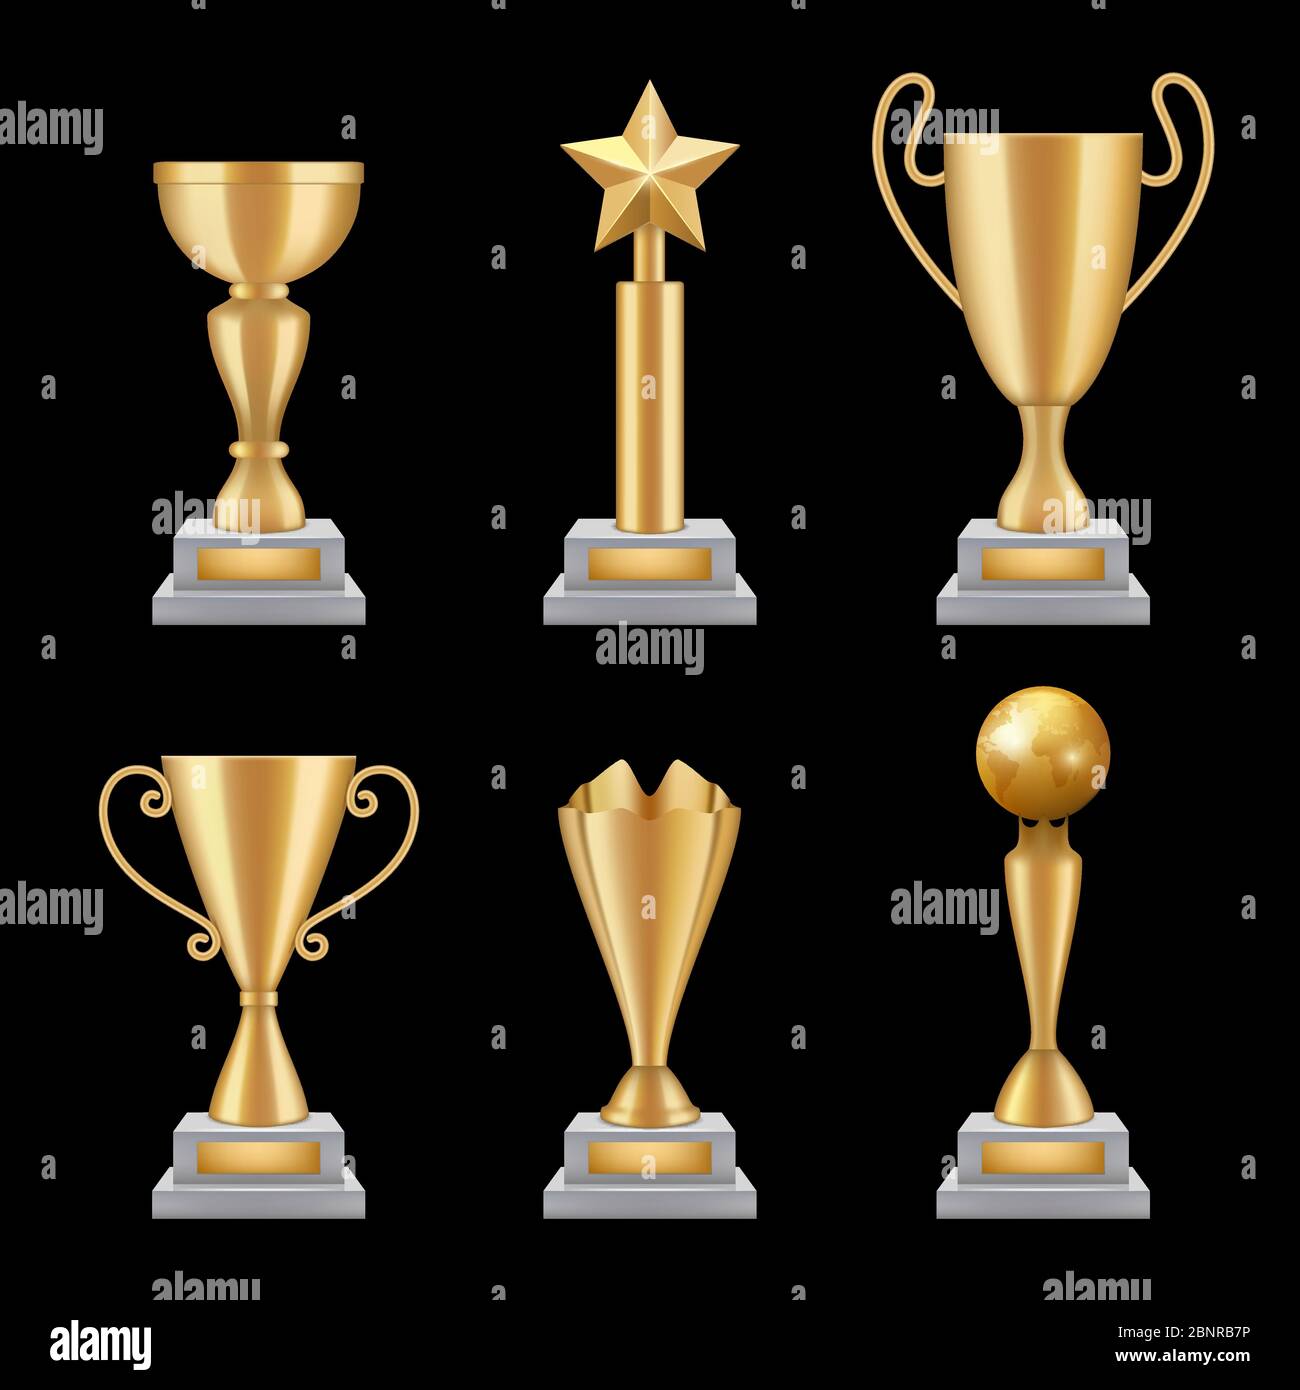 Award trophies realistic. Golden cup sport success star symbols vector 3d illustrations isolated Stock Vector